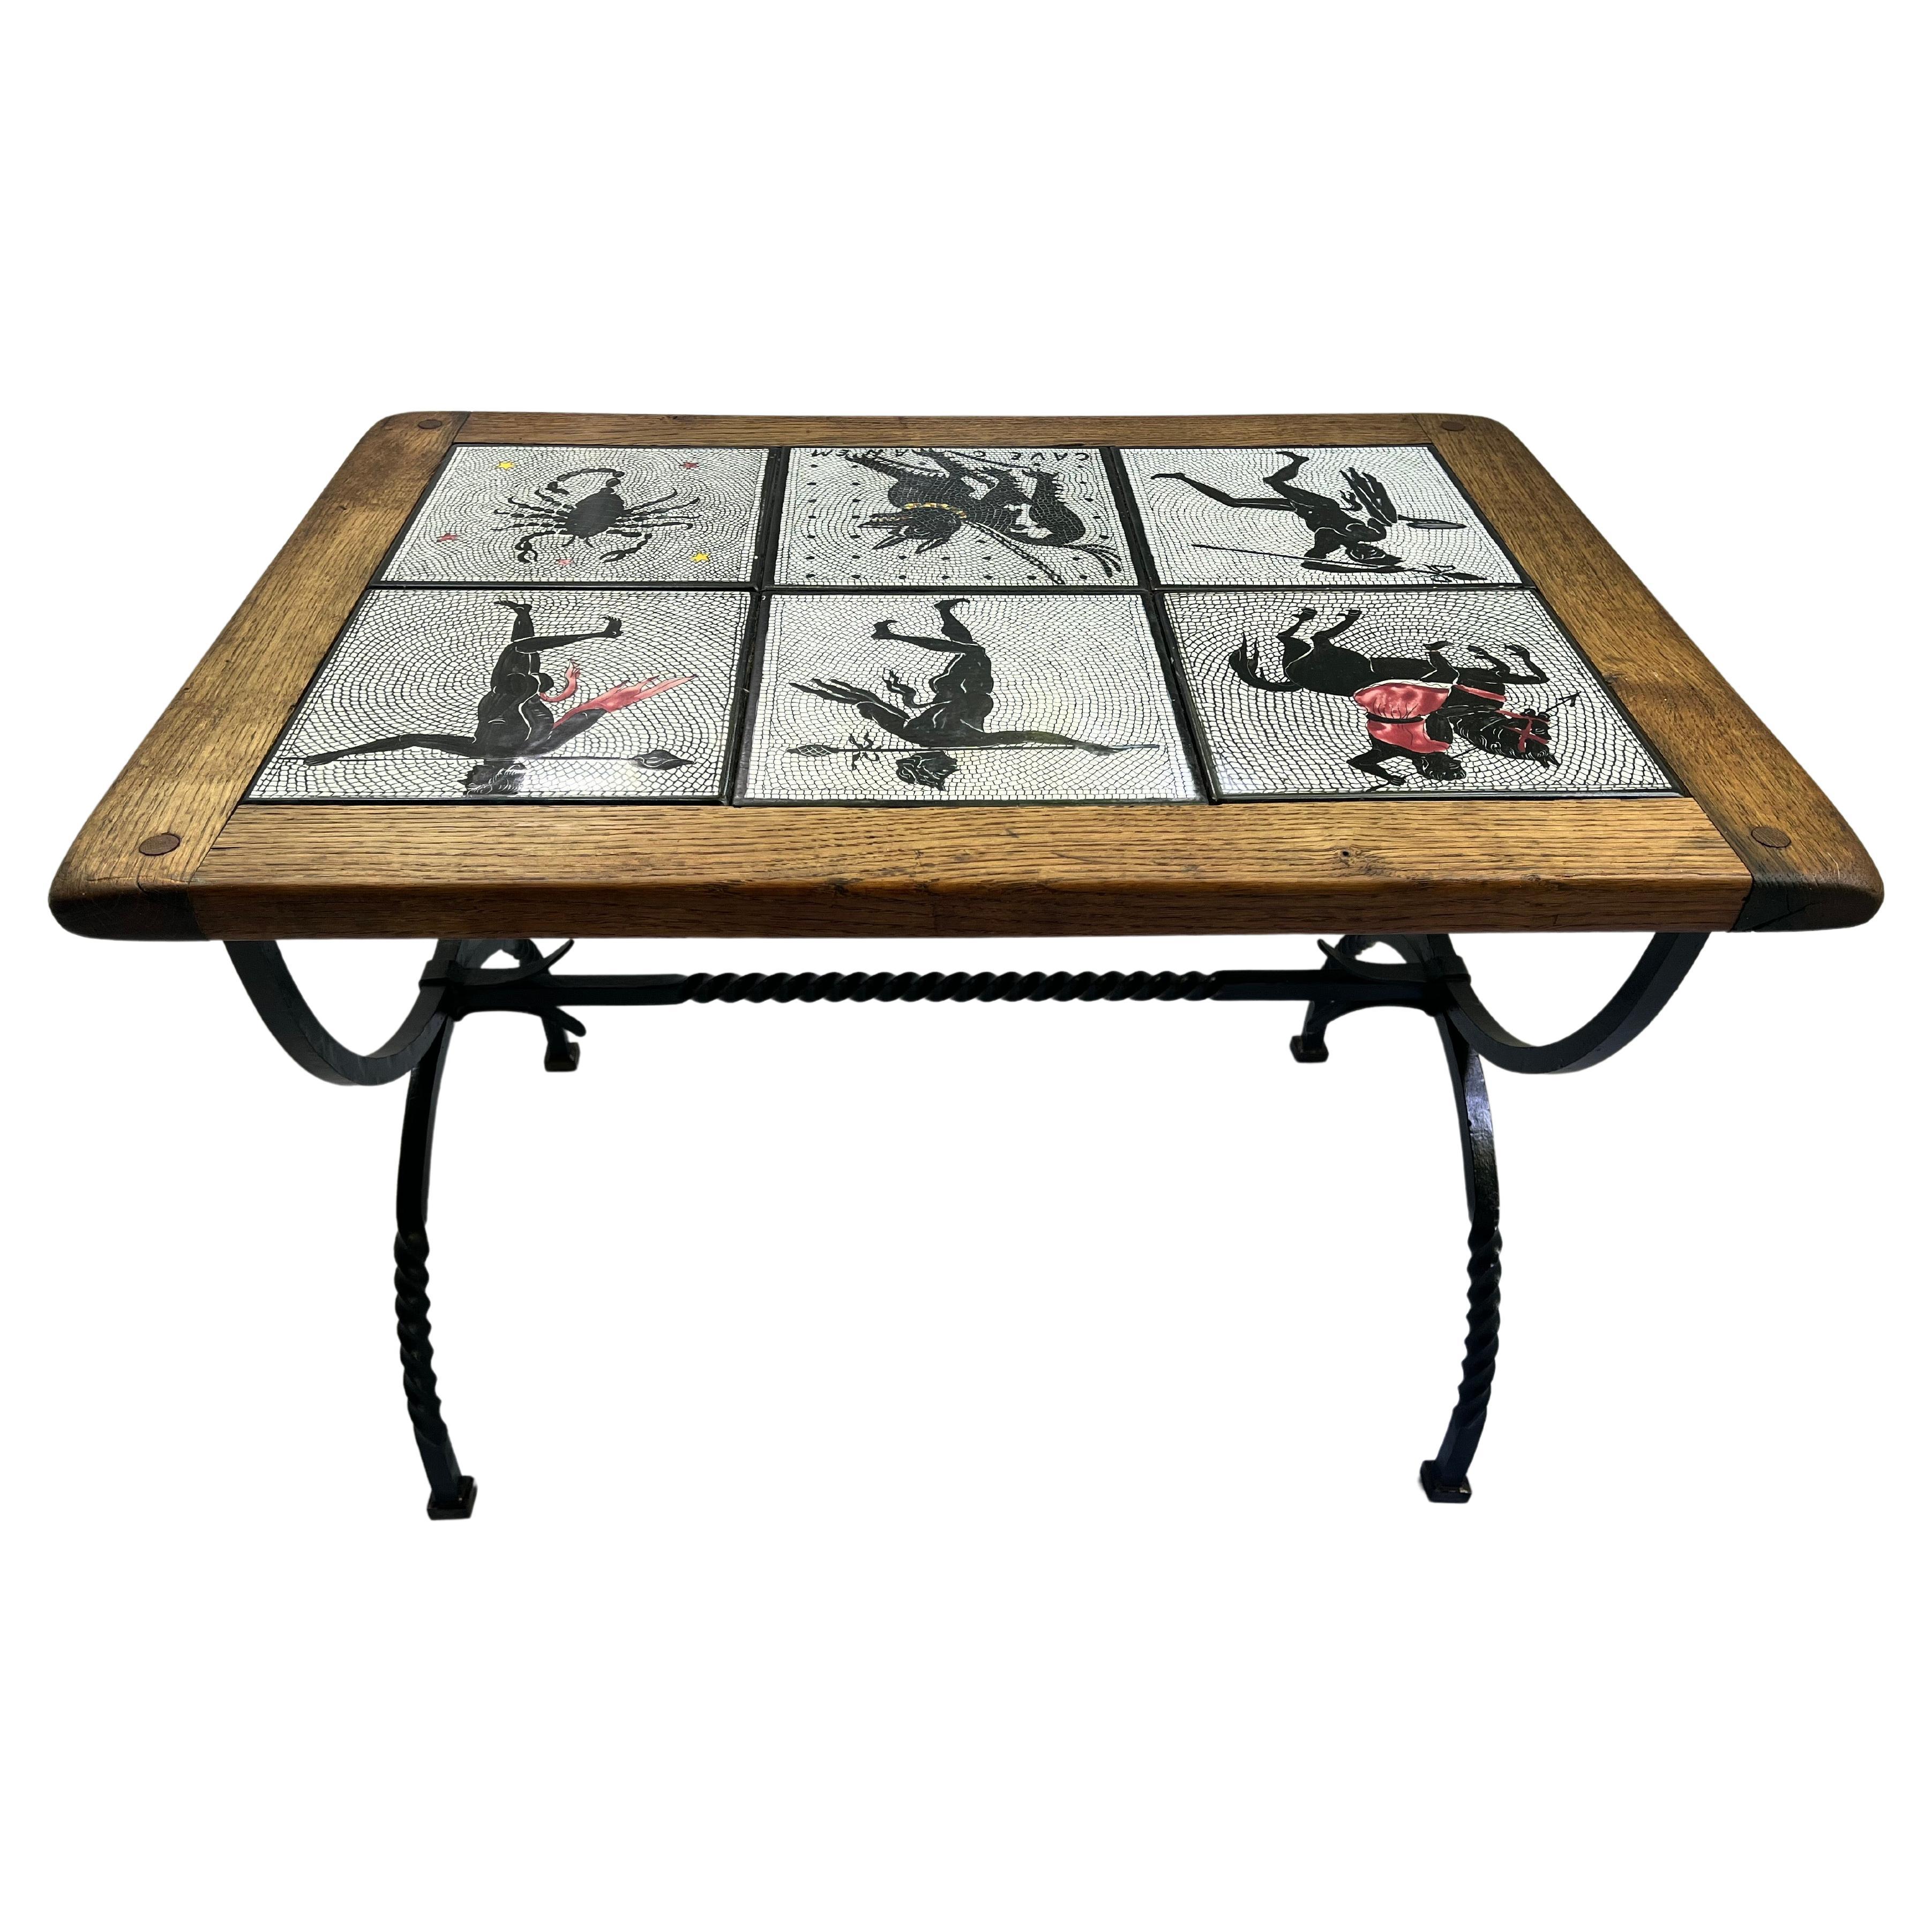 A vintage Italian tile top table with solid pegged wood frame and wrought iron base. The six oversized tiles on the top are vintage renditions of the style of tile found in the Tragic Poet House of Pompeii. Cave Canem. This well known tile is one of